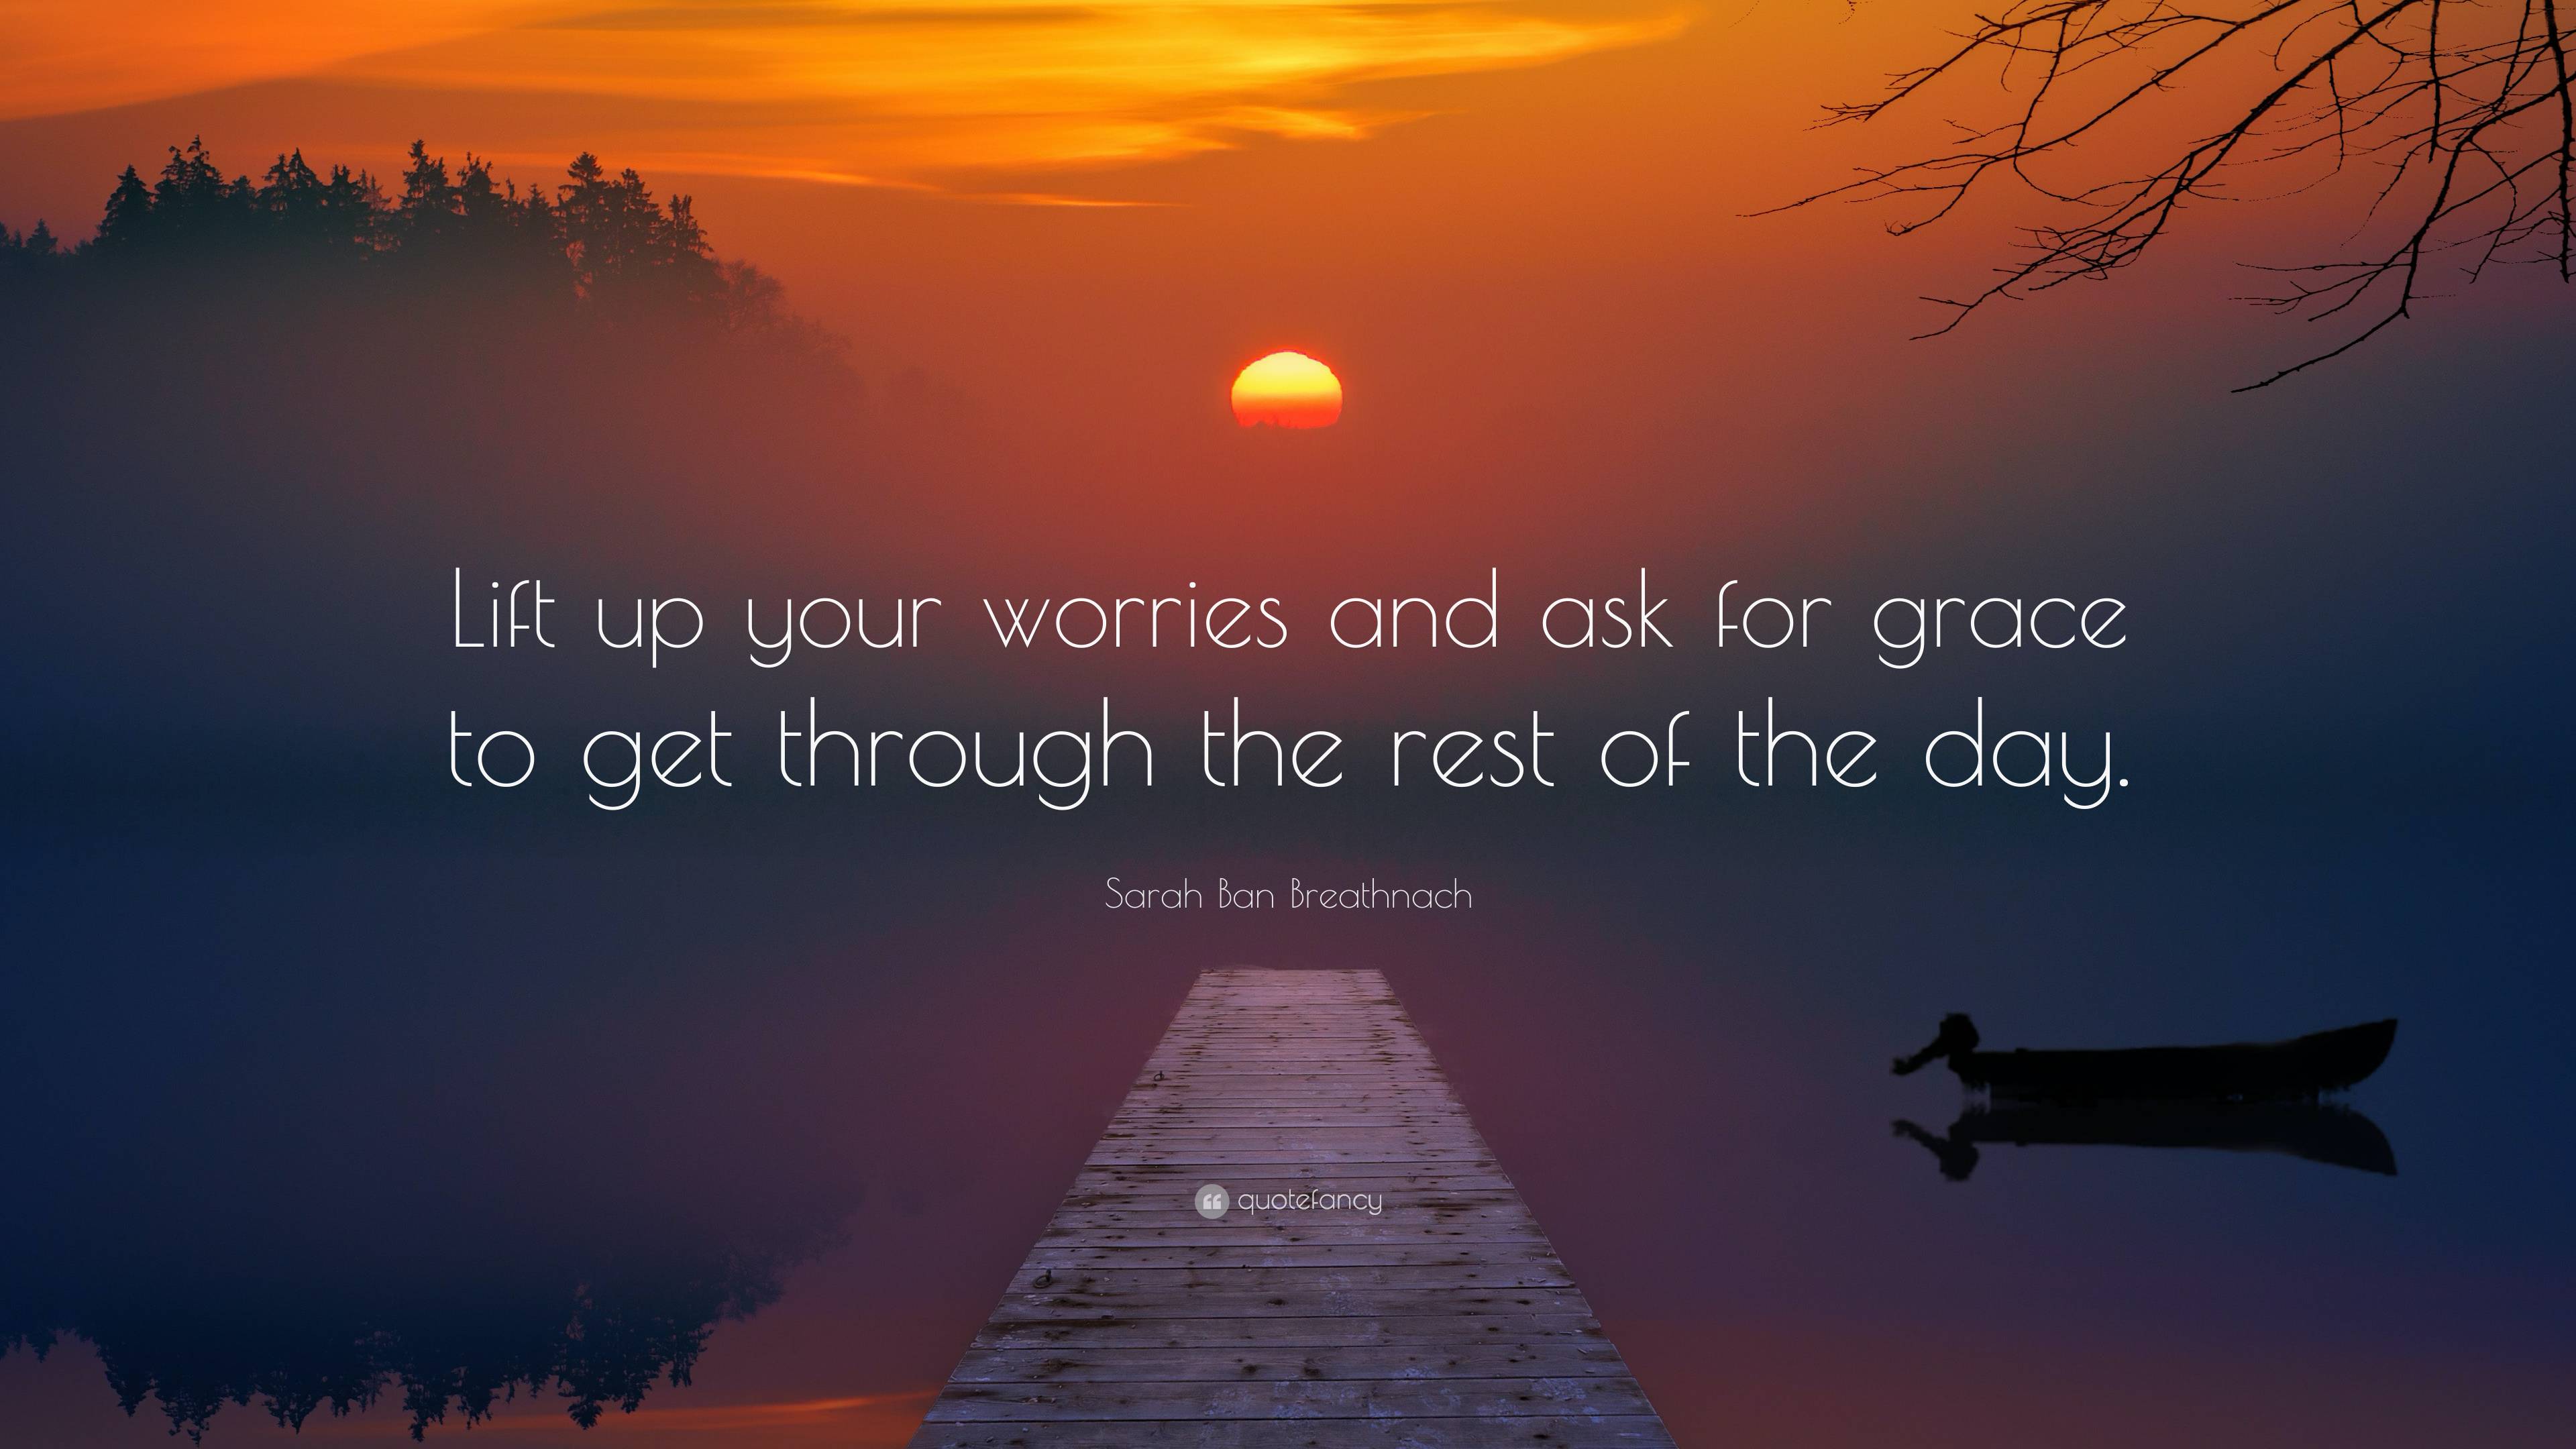 Sarah Ban Breathnach Quote: “Lift up your worries and ask for grace to ...